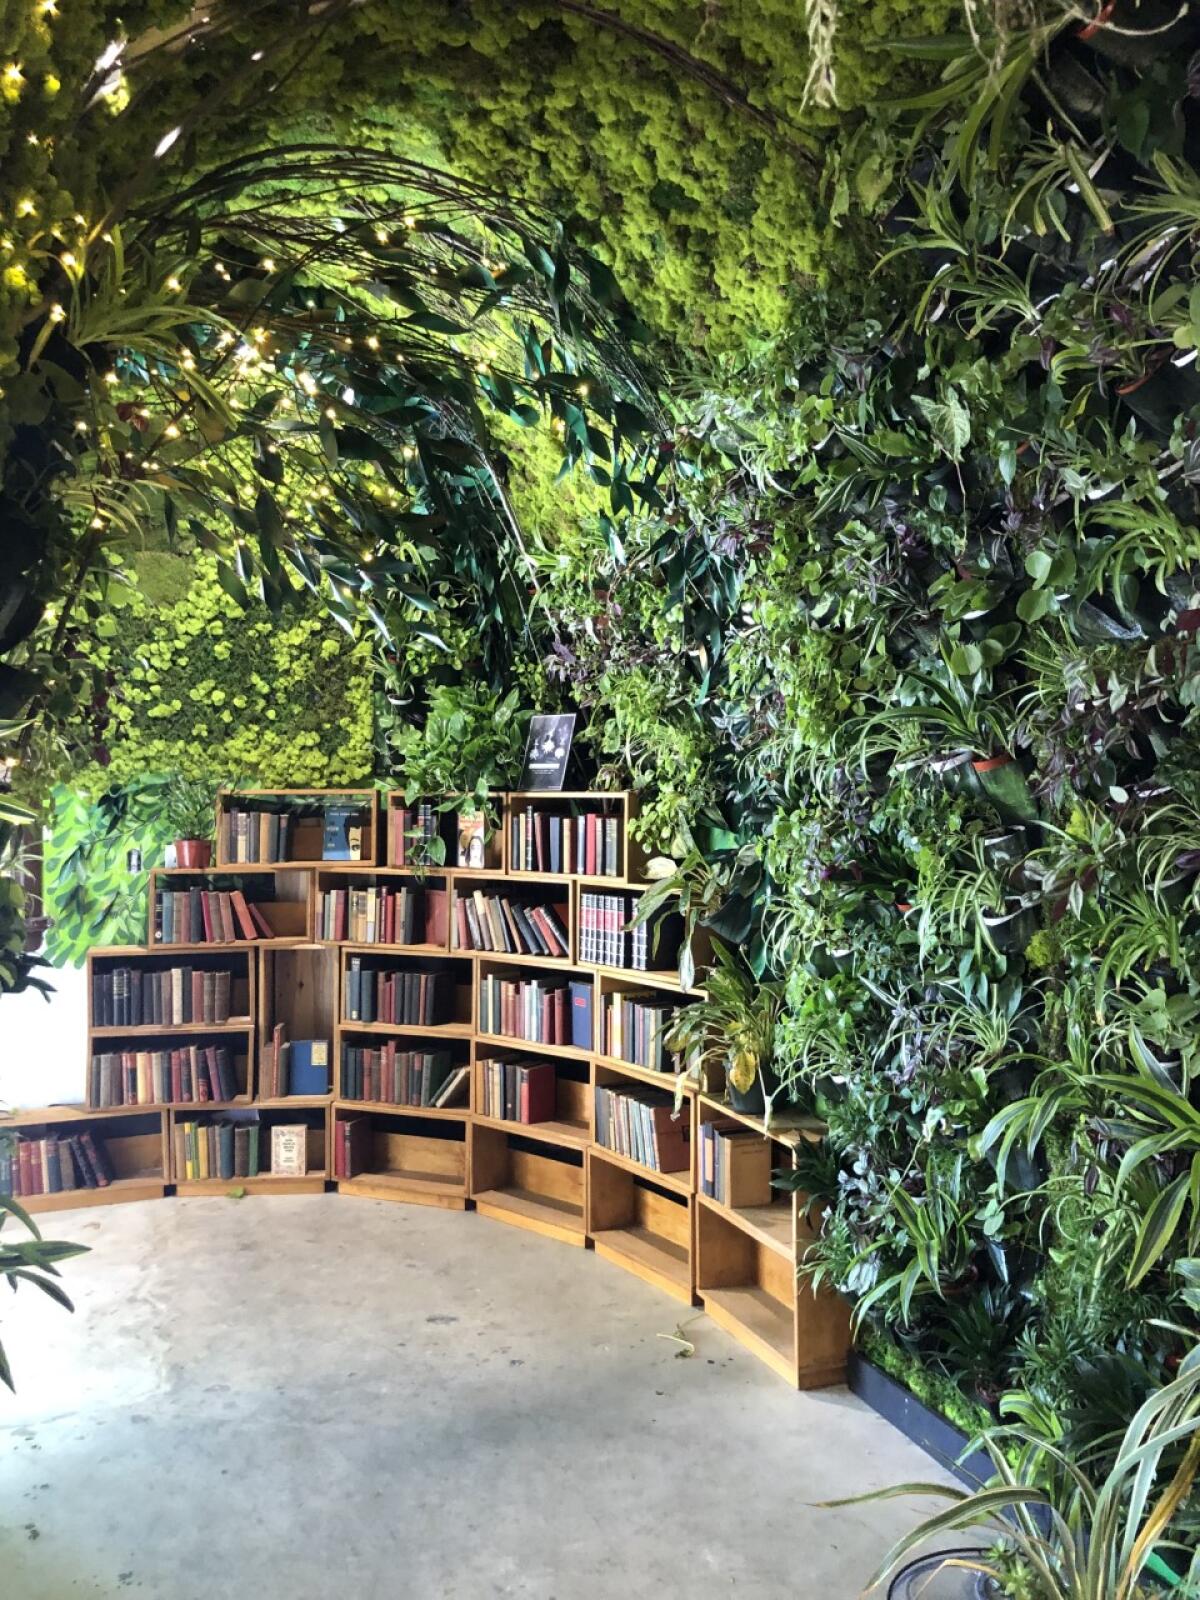 A tunnel of plants leads to wooden bookcases.